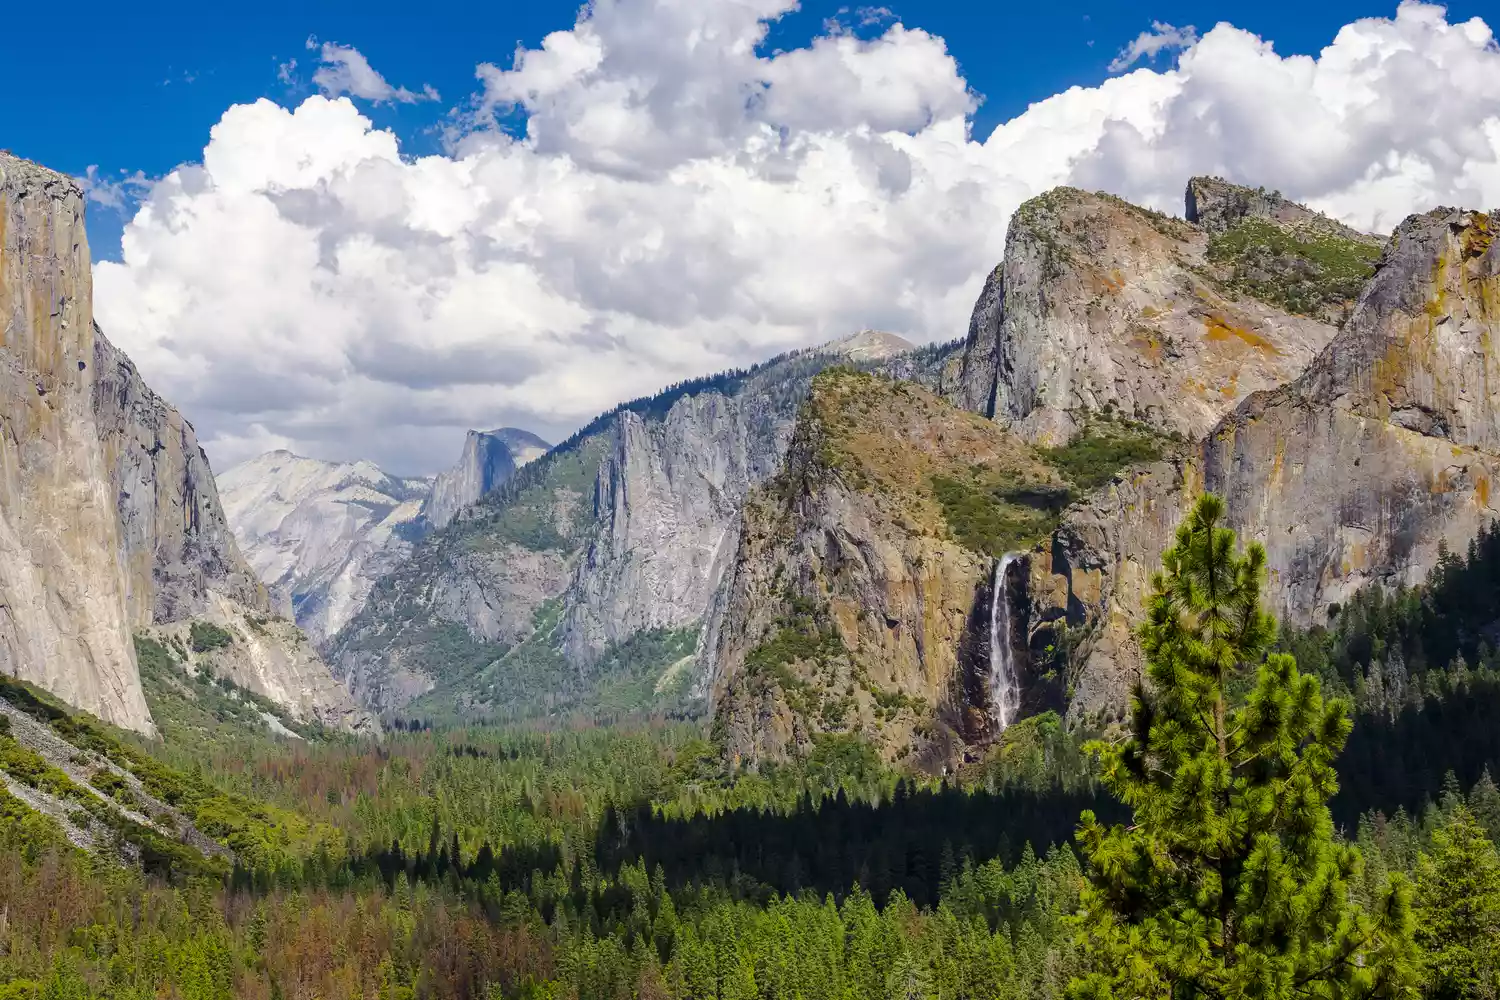 A view of mountains and vibrant green trees in front of clouds and blue sky at Bridal Veil Falls in Yosemite National Park in California.